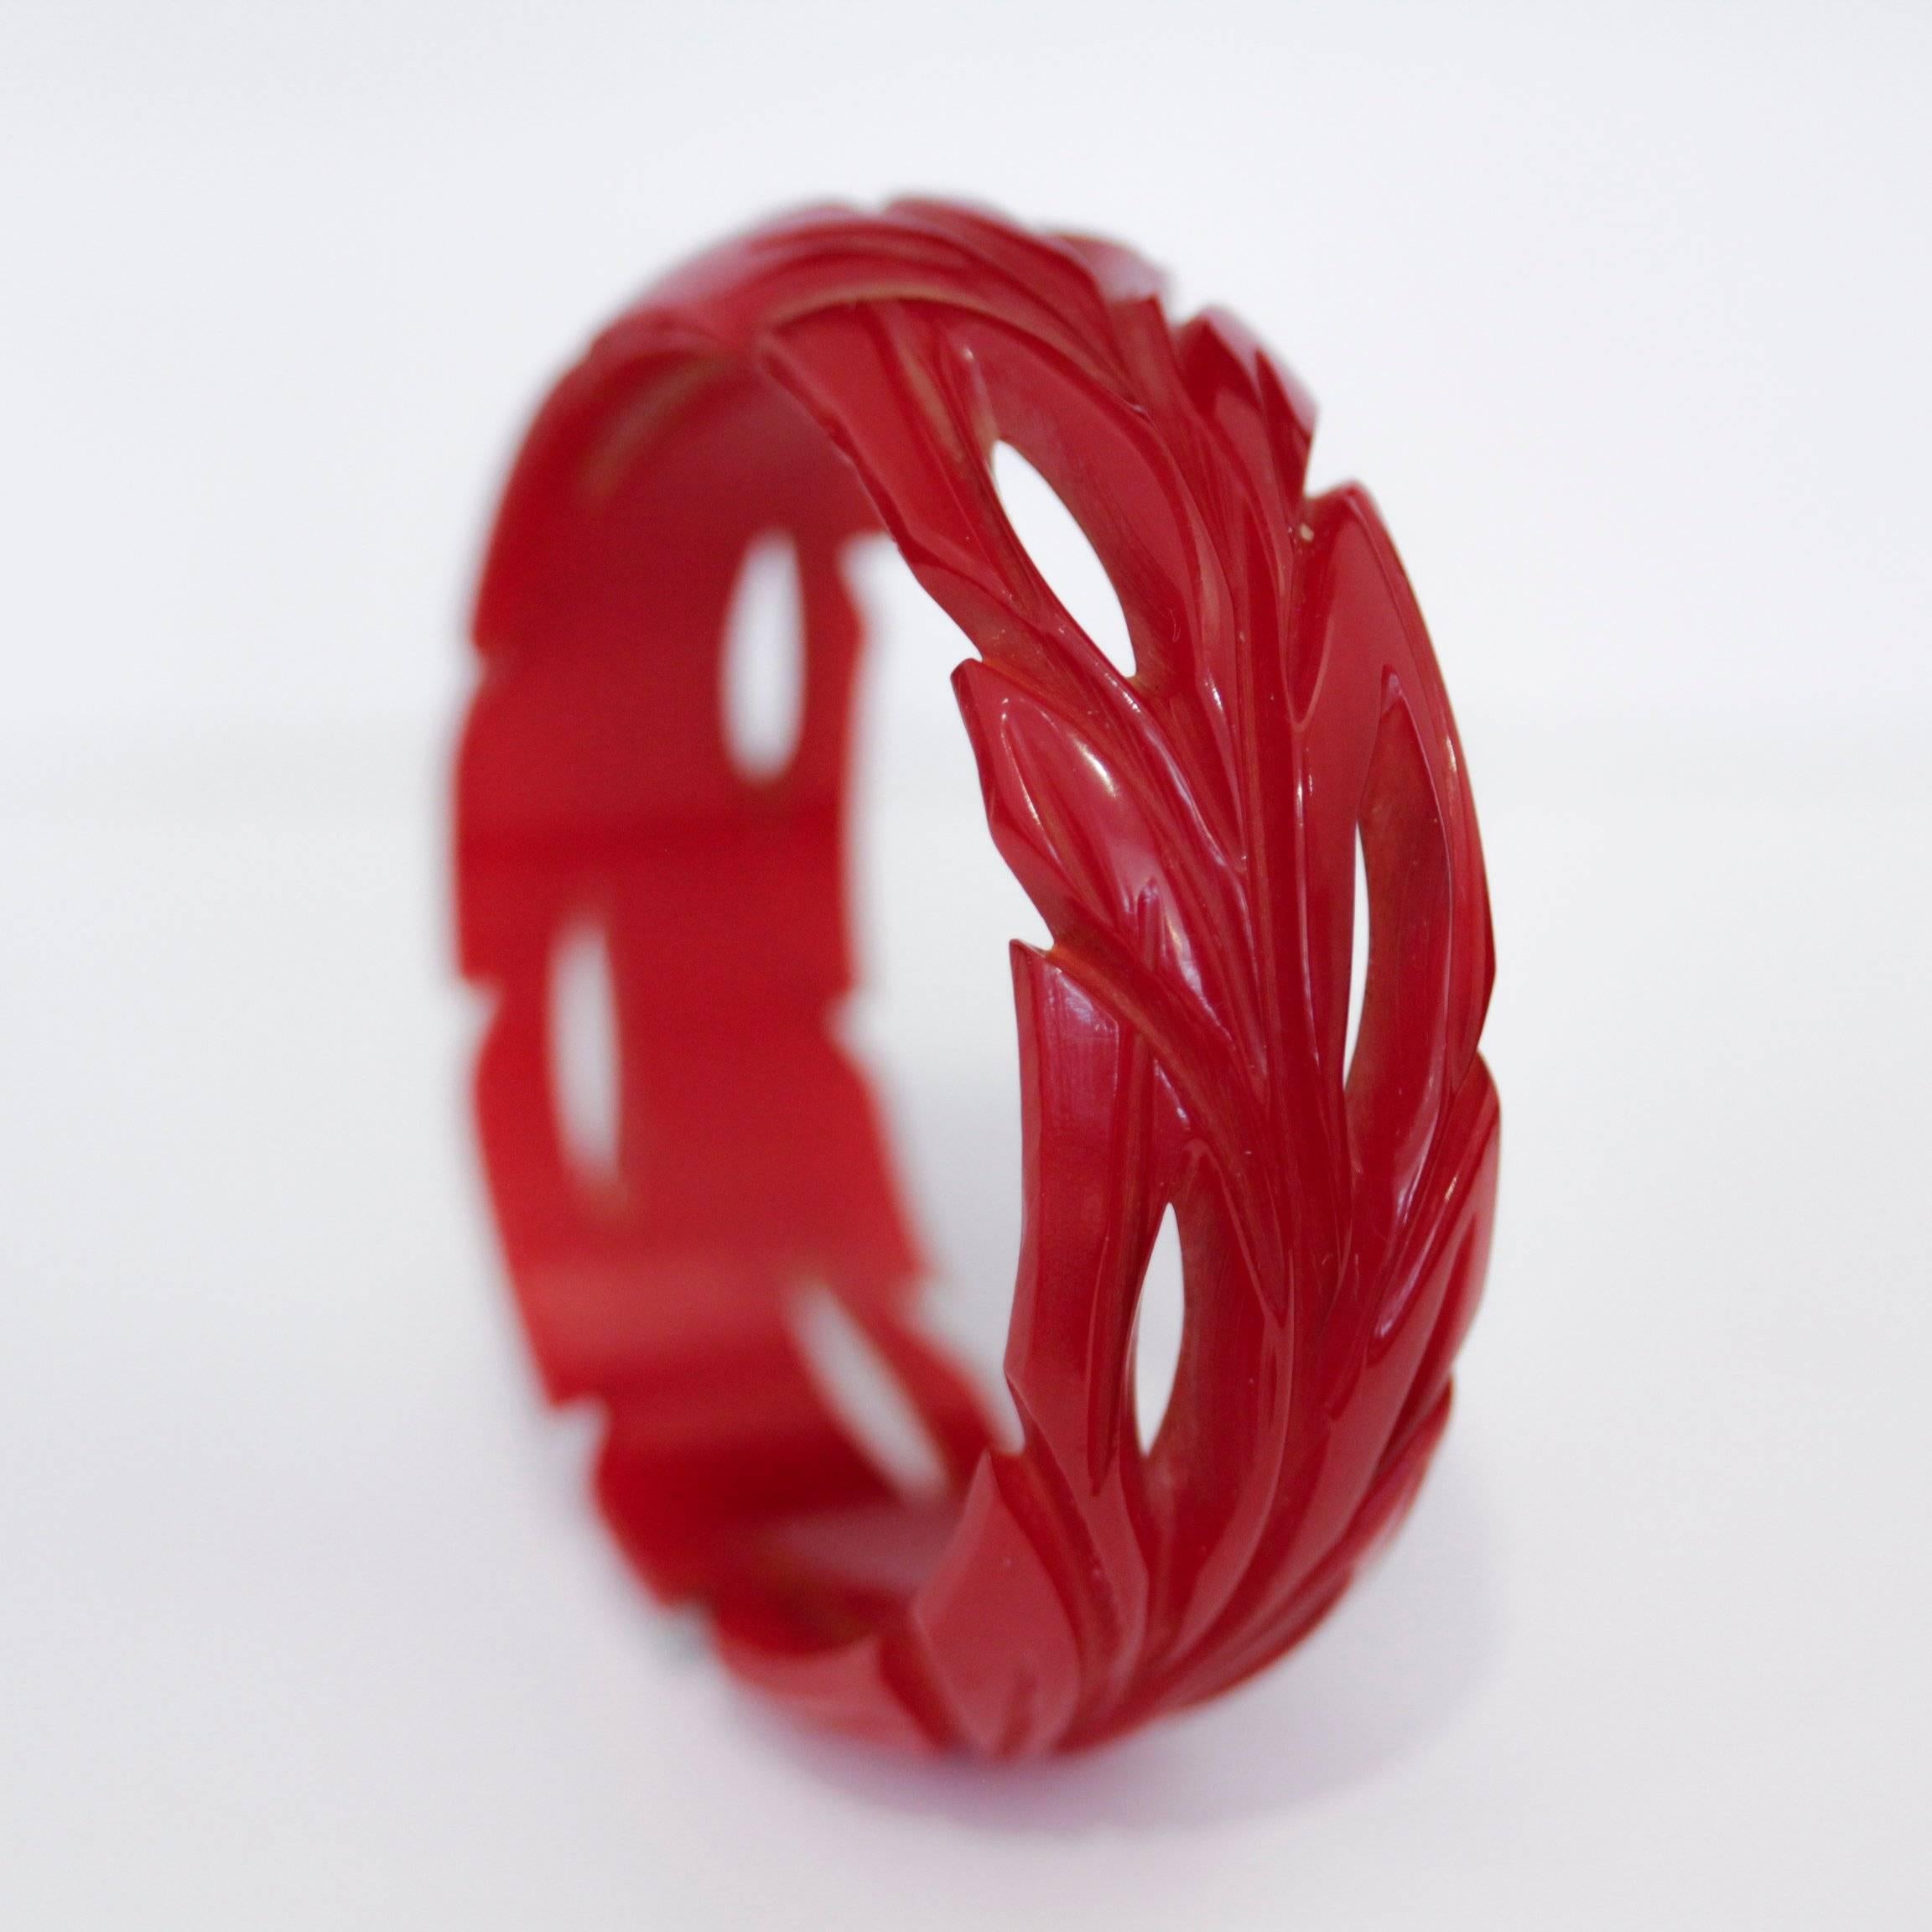 Women's Art Deco Cherry Red Bakelite Bangle, Deep Leaf Carvings and Cut-Outs from Bangle For Sale